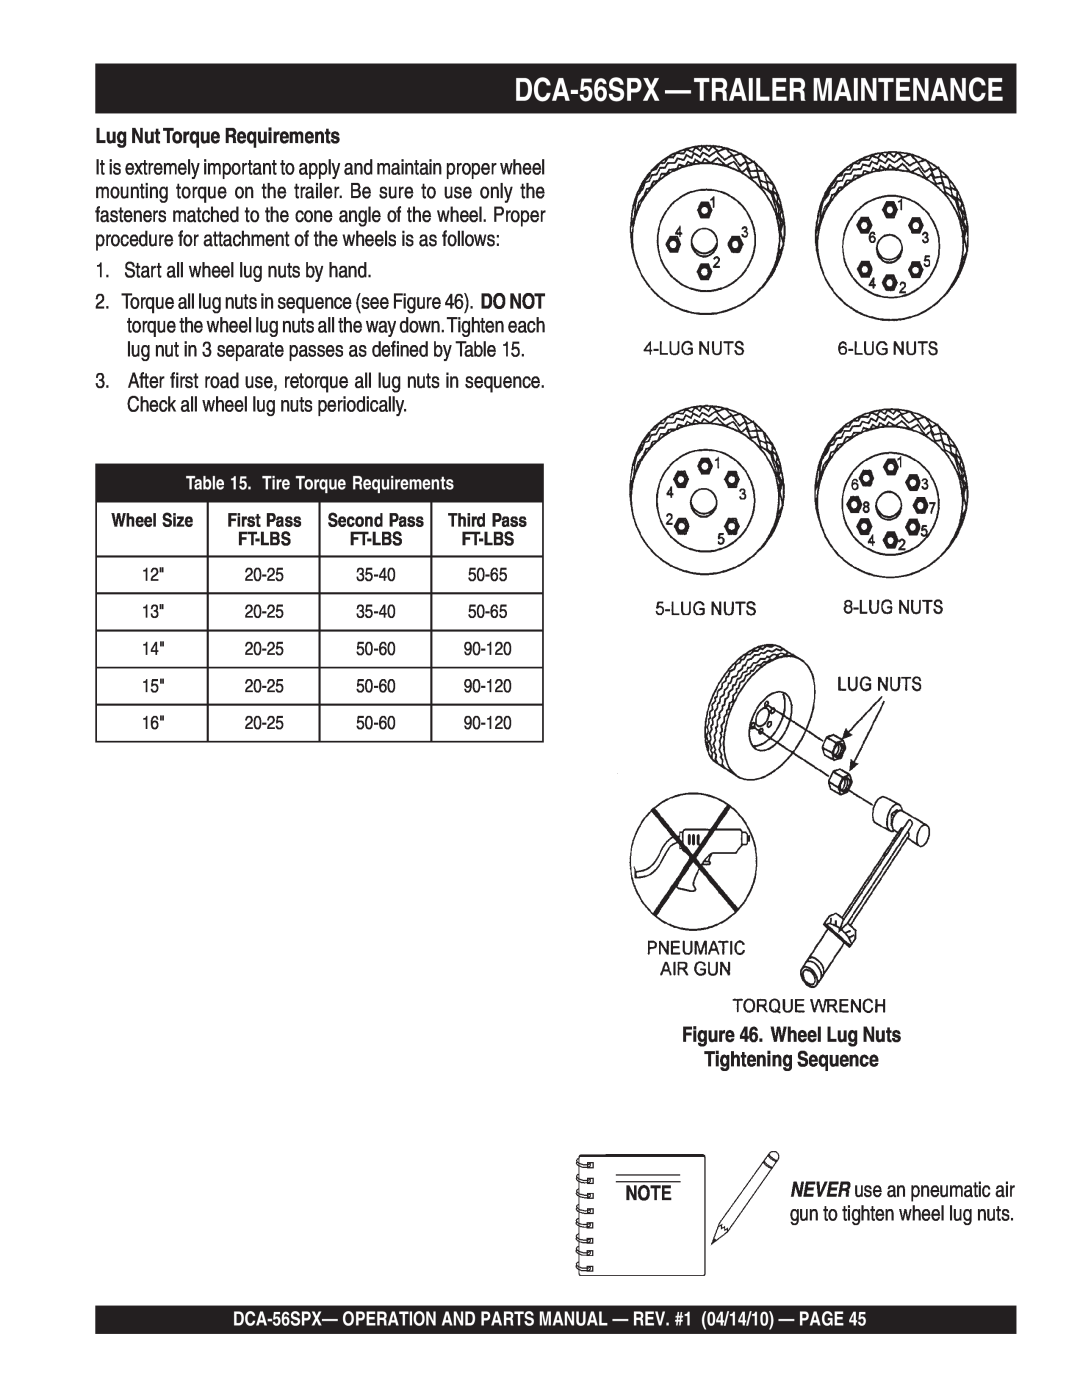 Multiquip DCA-56SPX -TRAILERMAINTENANCE, Lug Nut Torque Requirements, Wheel Lug Nuts Tightening Sequence, First Pass 